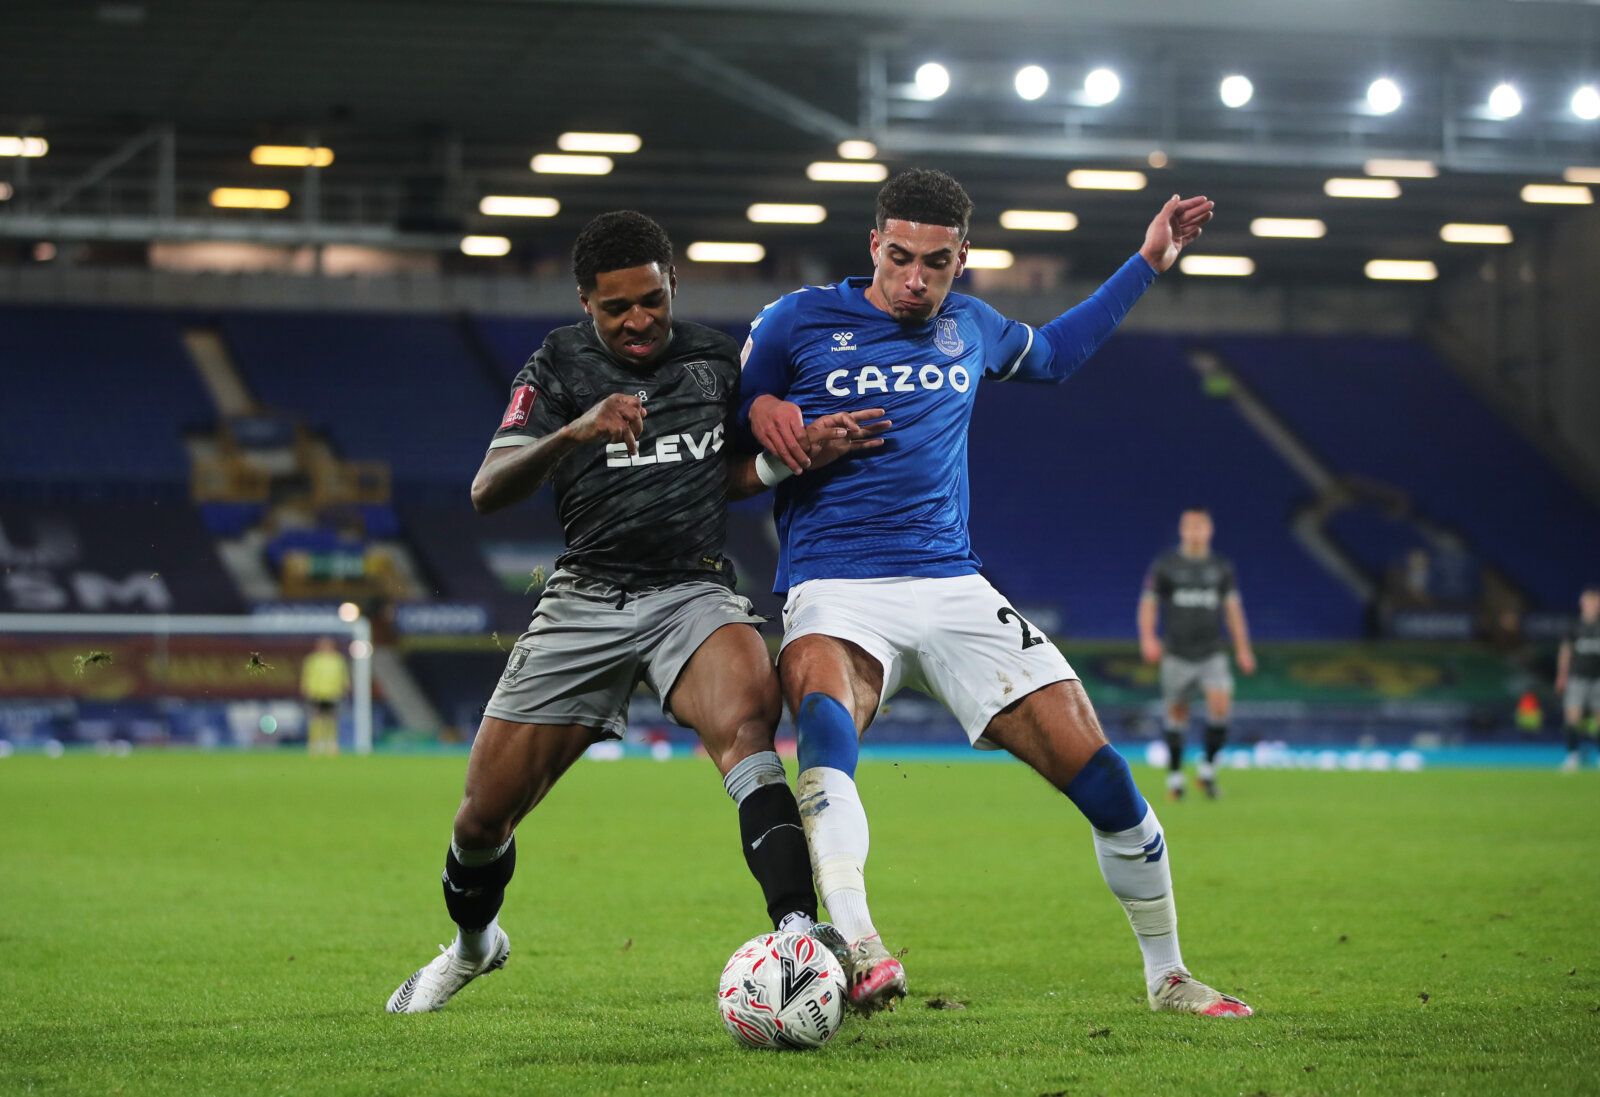 Soccer Football - FA Cup - Fourth Round - Everton v Sheffield Wednesday - Goodison Park, Liverpool, Britain - January 24, 2021 Sheffield Wednesday's Kadeem Harris in action with Everton's Ben Godfrey Action Images via Reuters/Molly Darlington